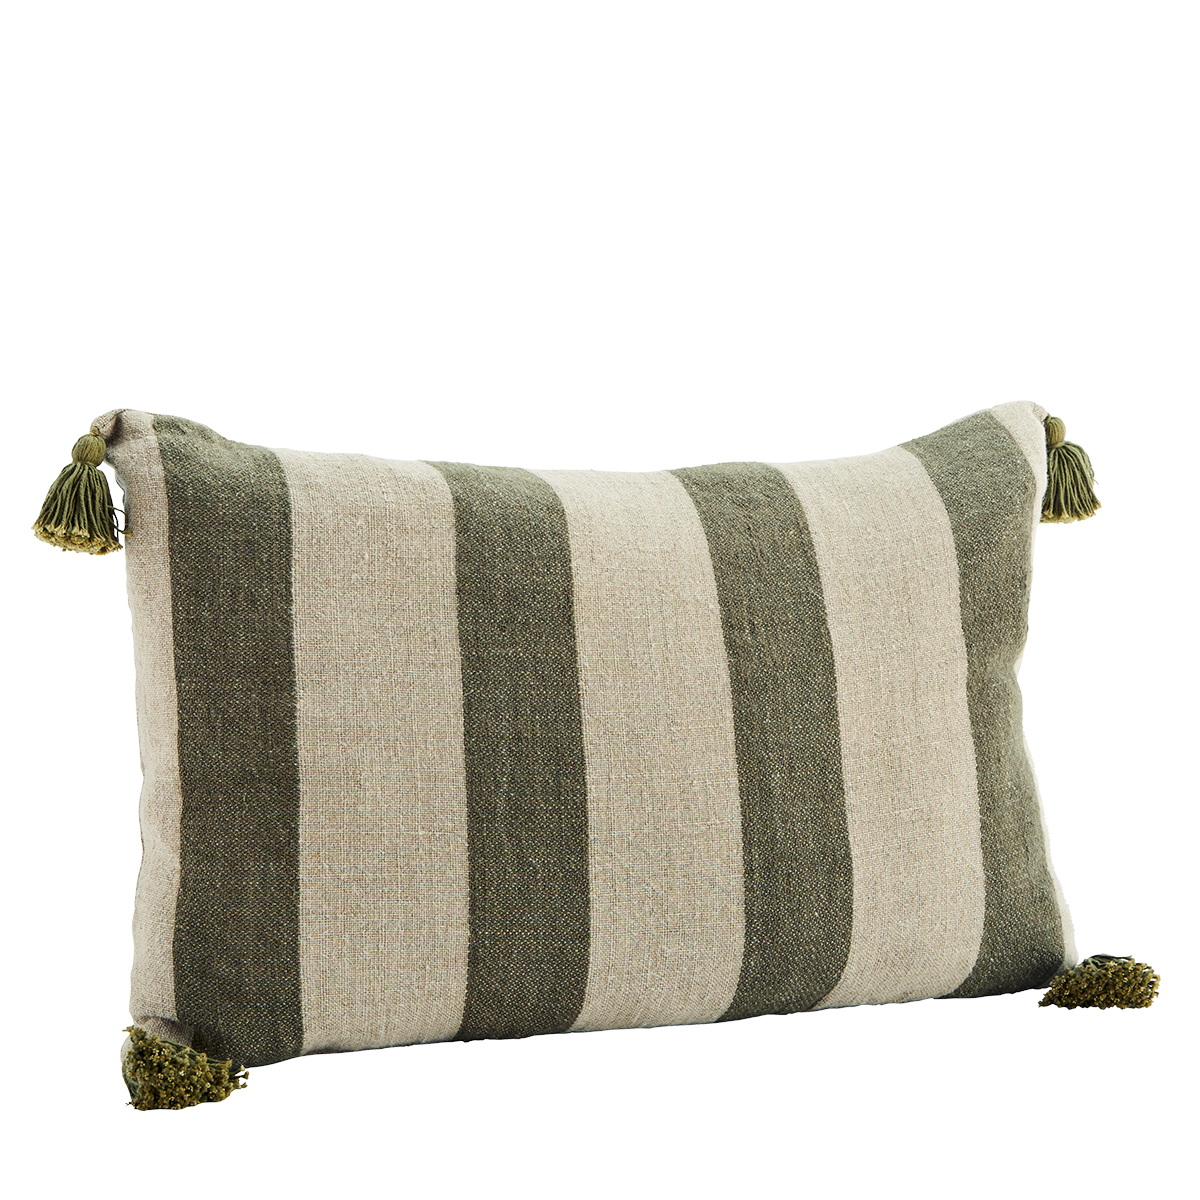 Madam Stoltz Natural and Olive Linen Striped Cushion Cover